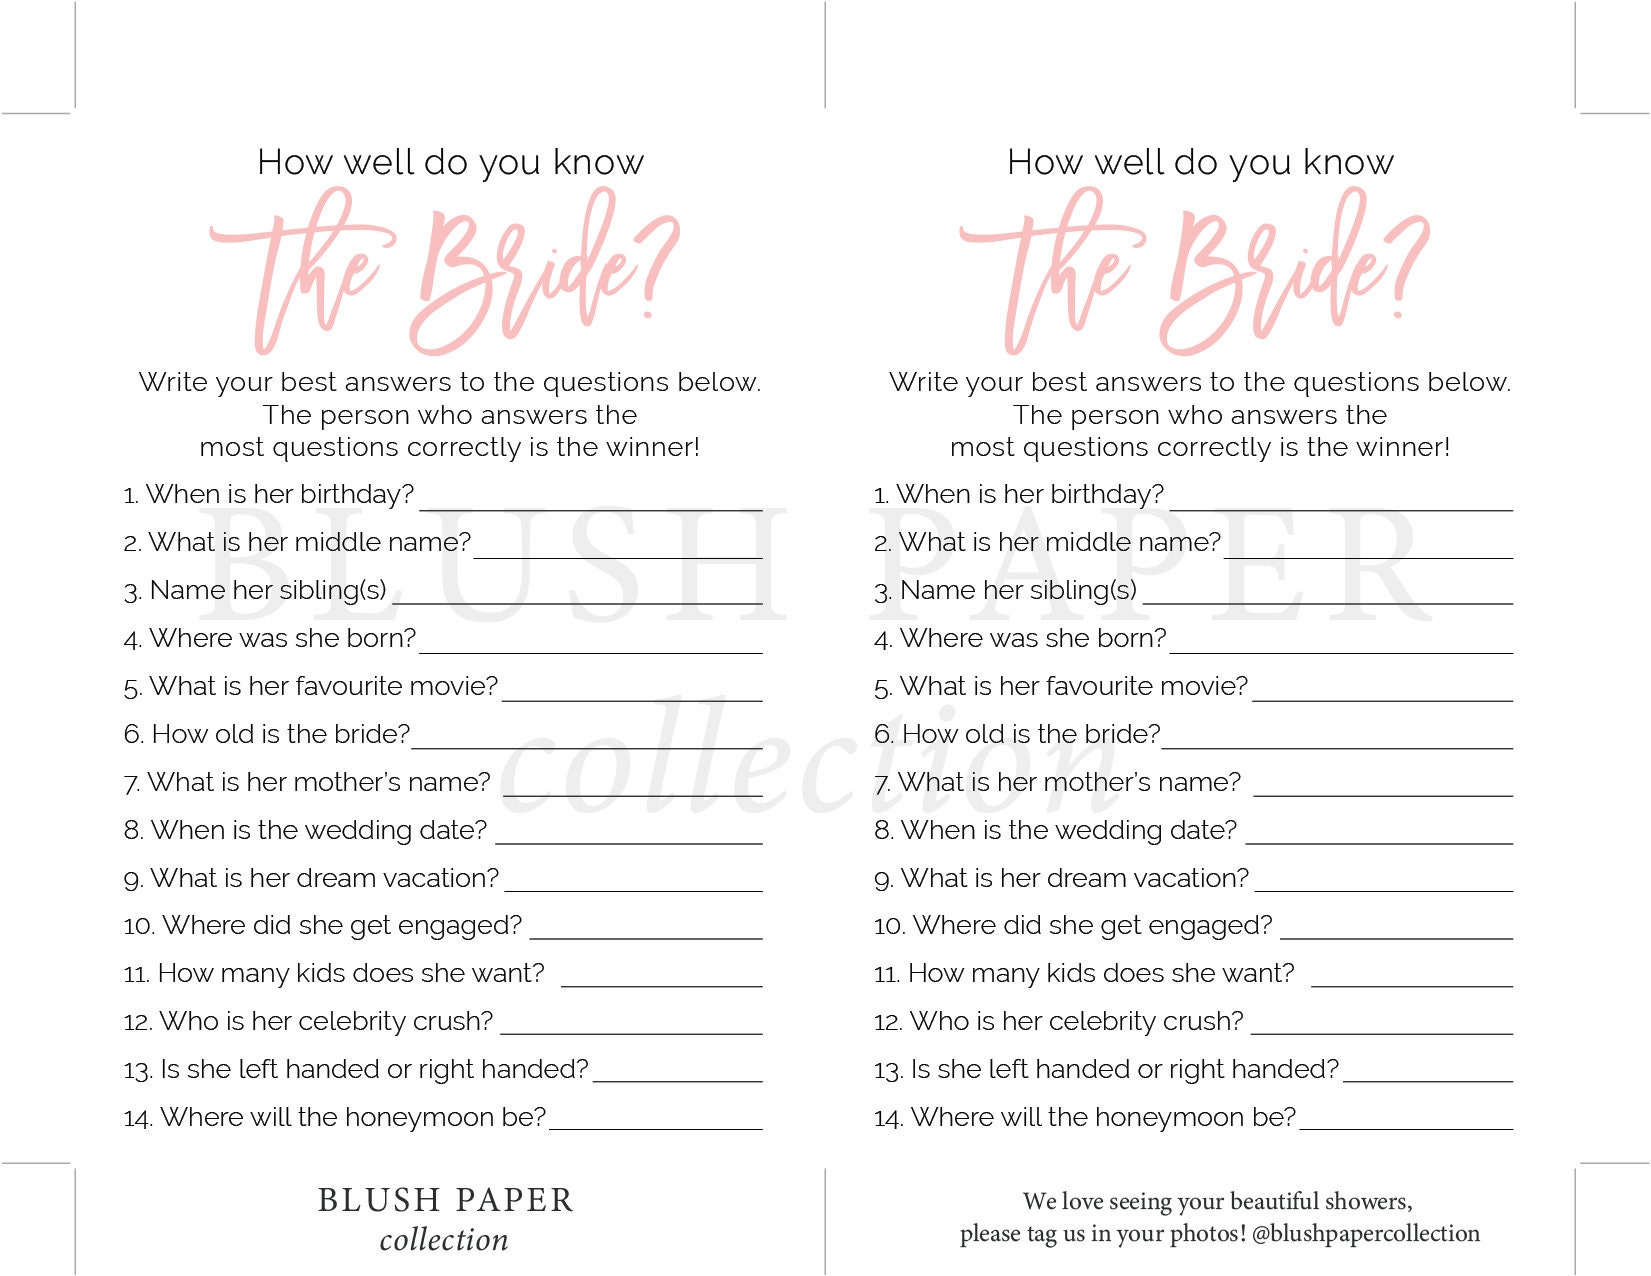 How Well Do You Know the Bride Bridal Shower Games Printable | Etsy